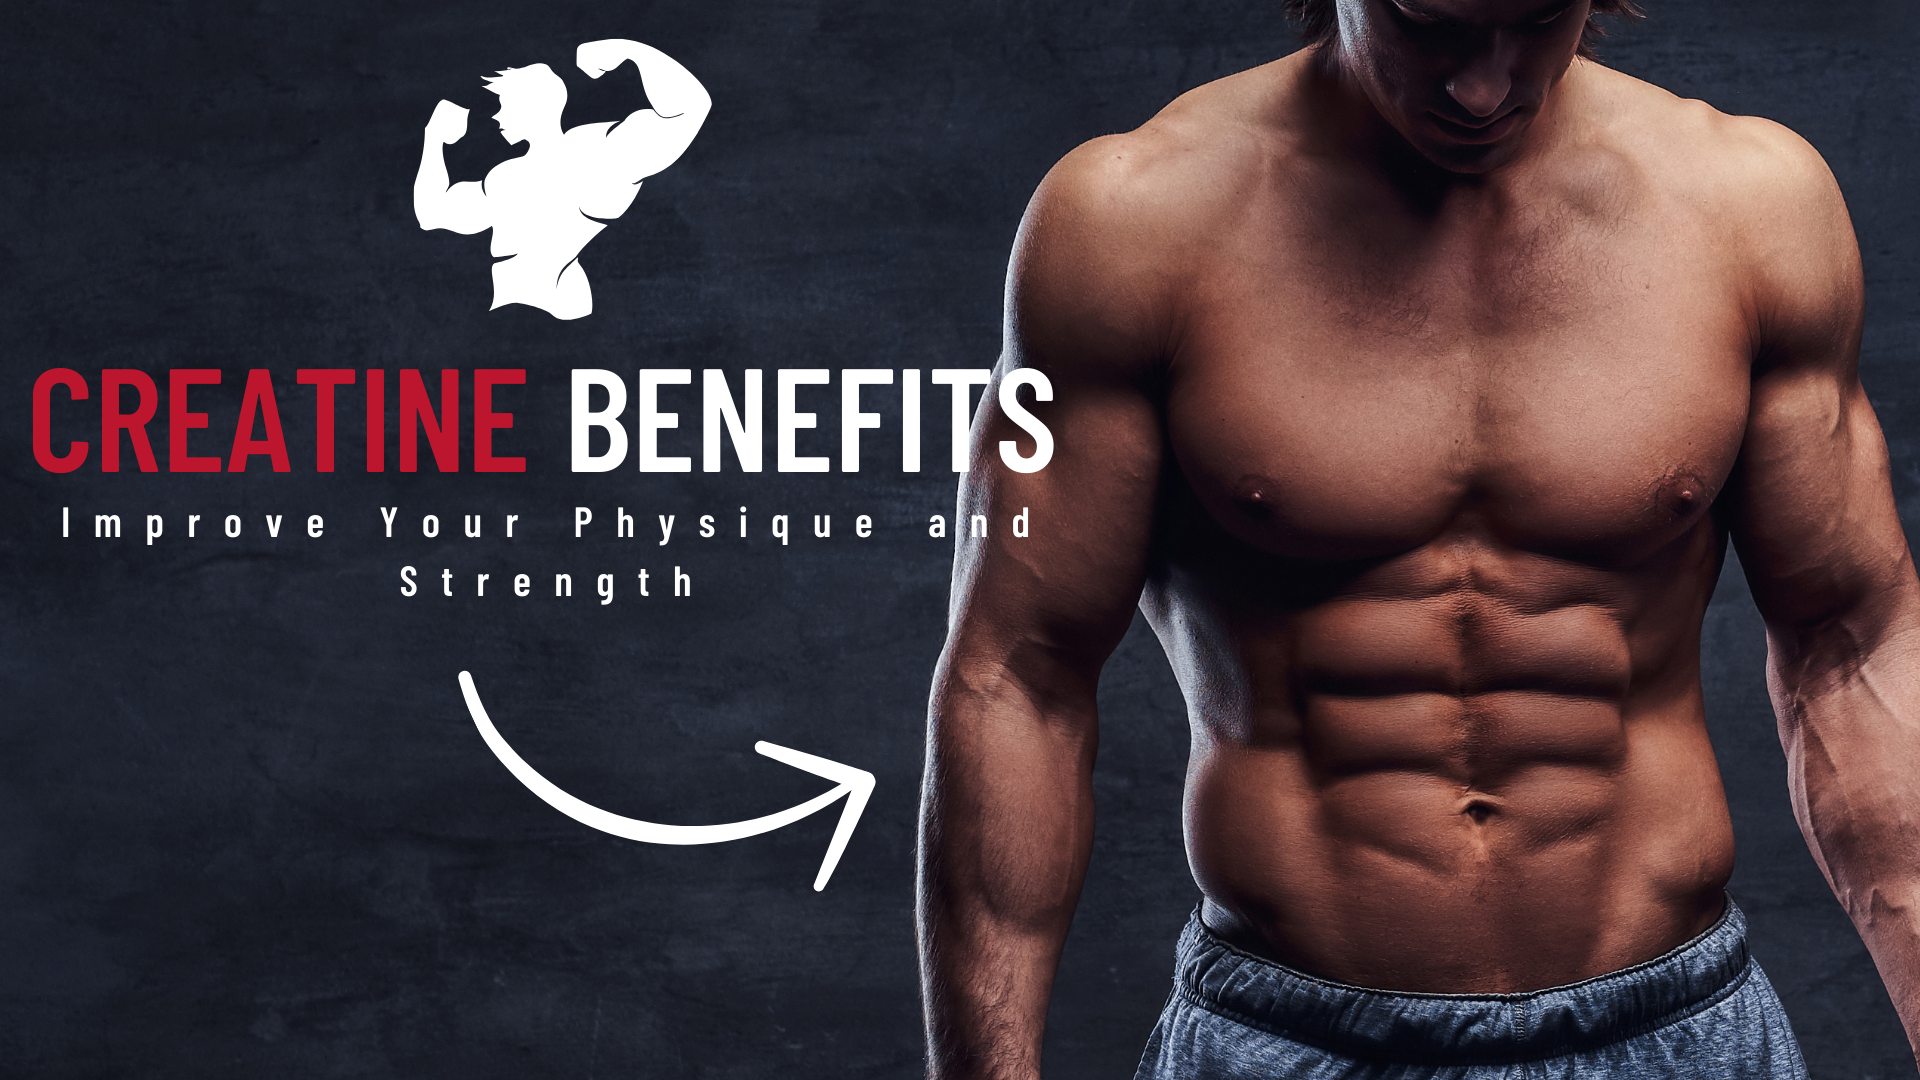 Creatine Benefits | Improve Your Physique and Strength